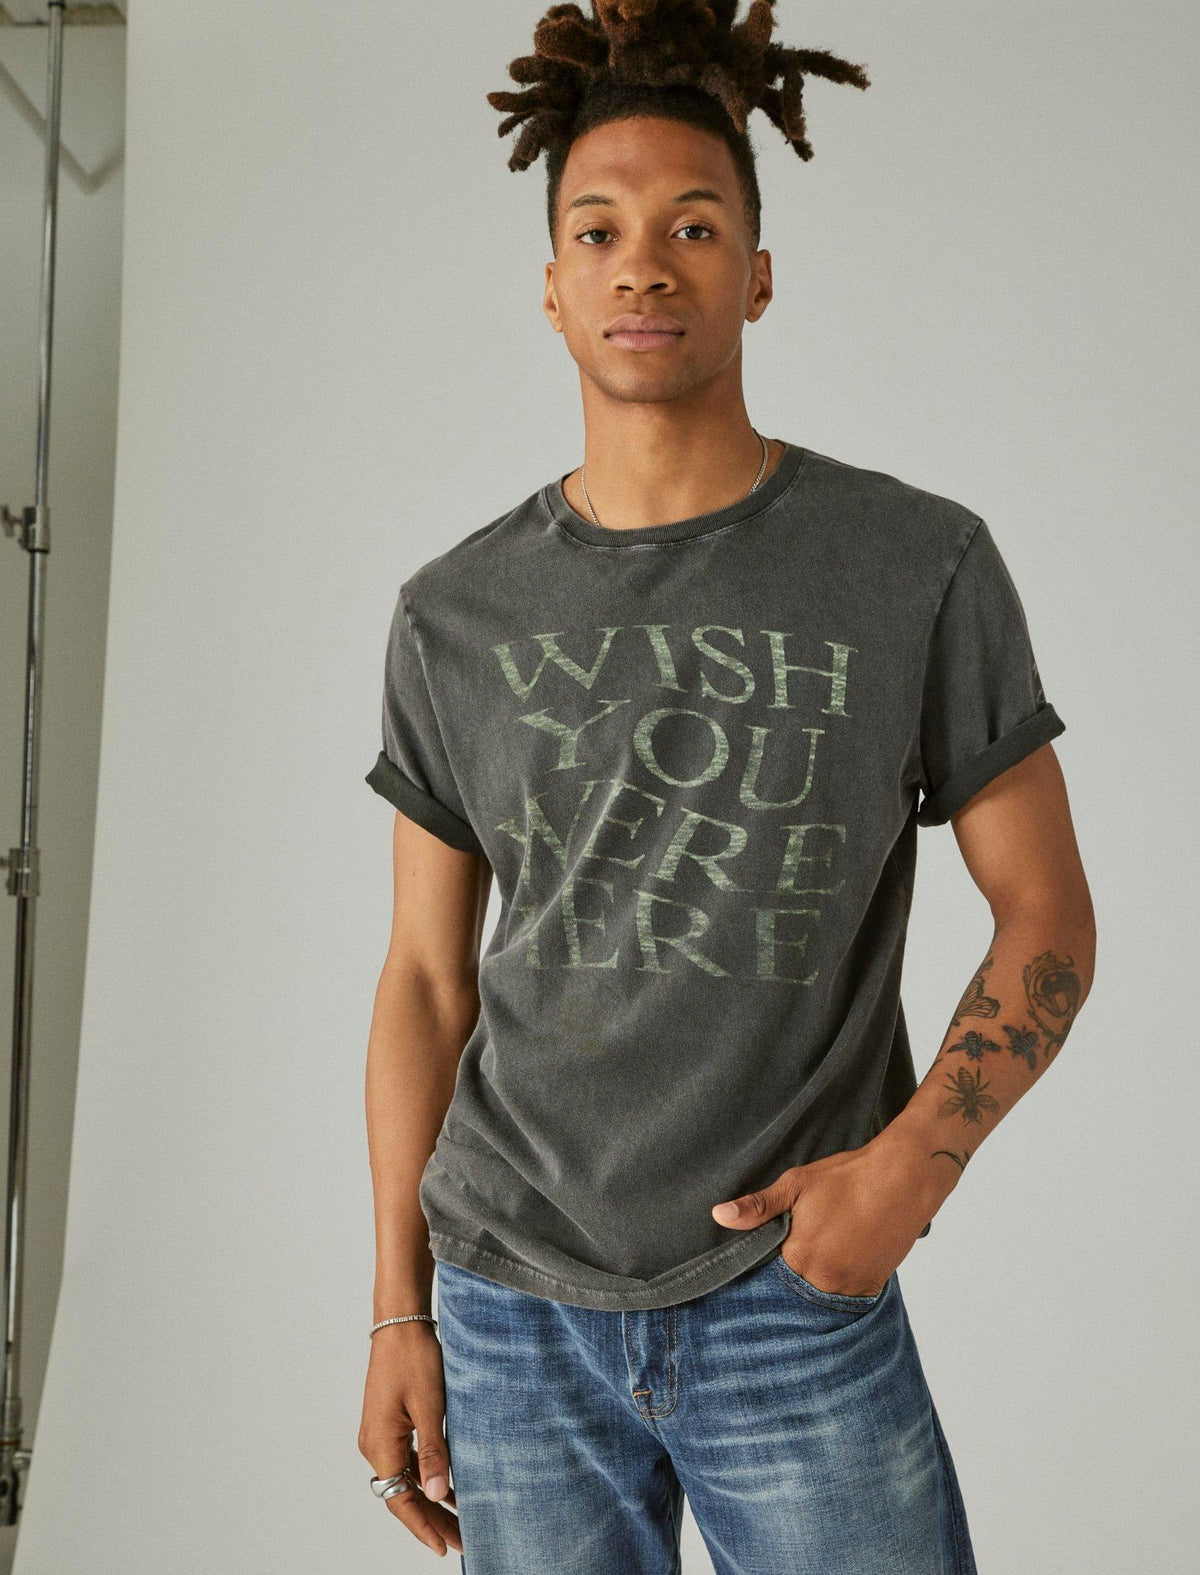 Lucky Brand Pink Floyd Wish You Were Here Graphic Tee Jet Black